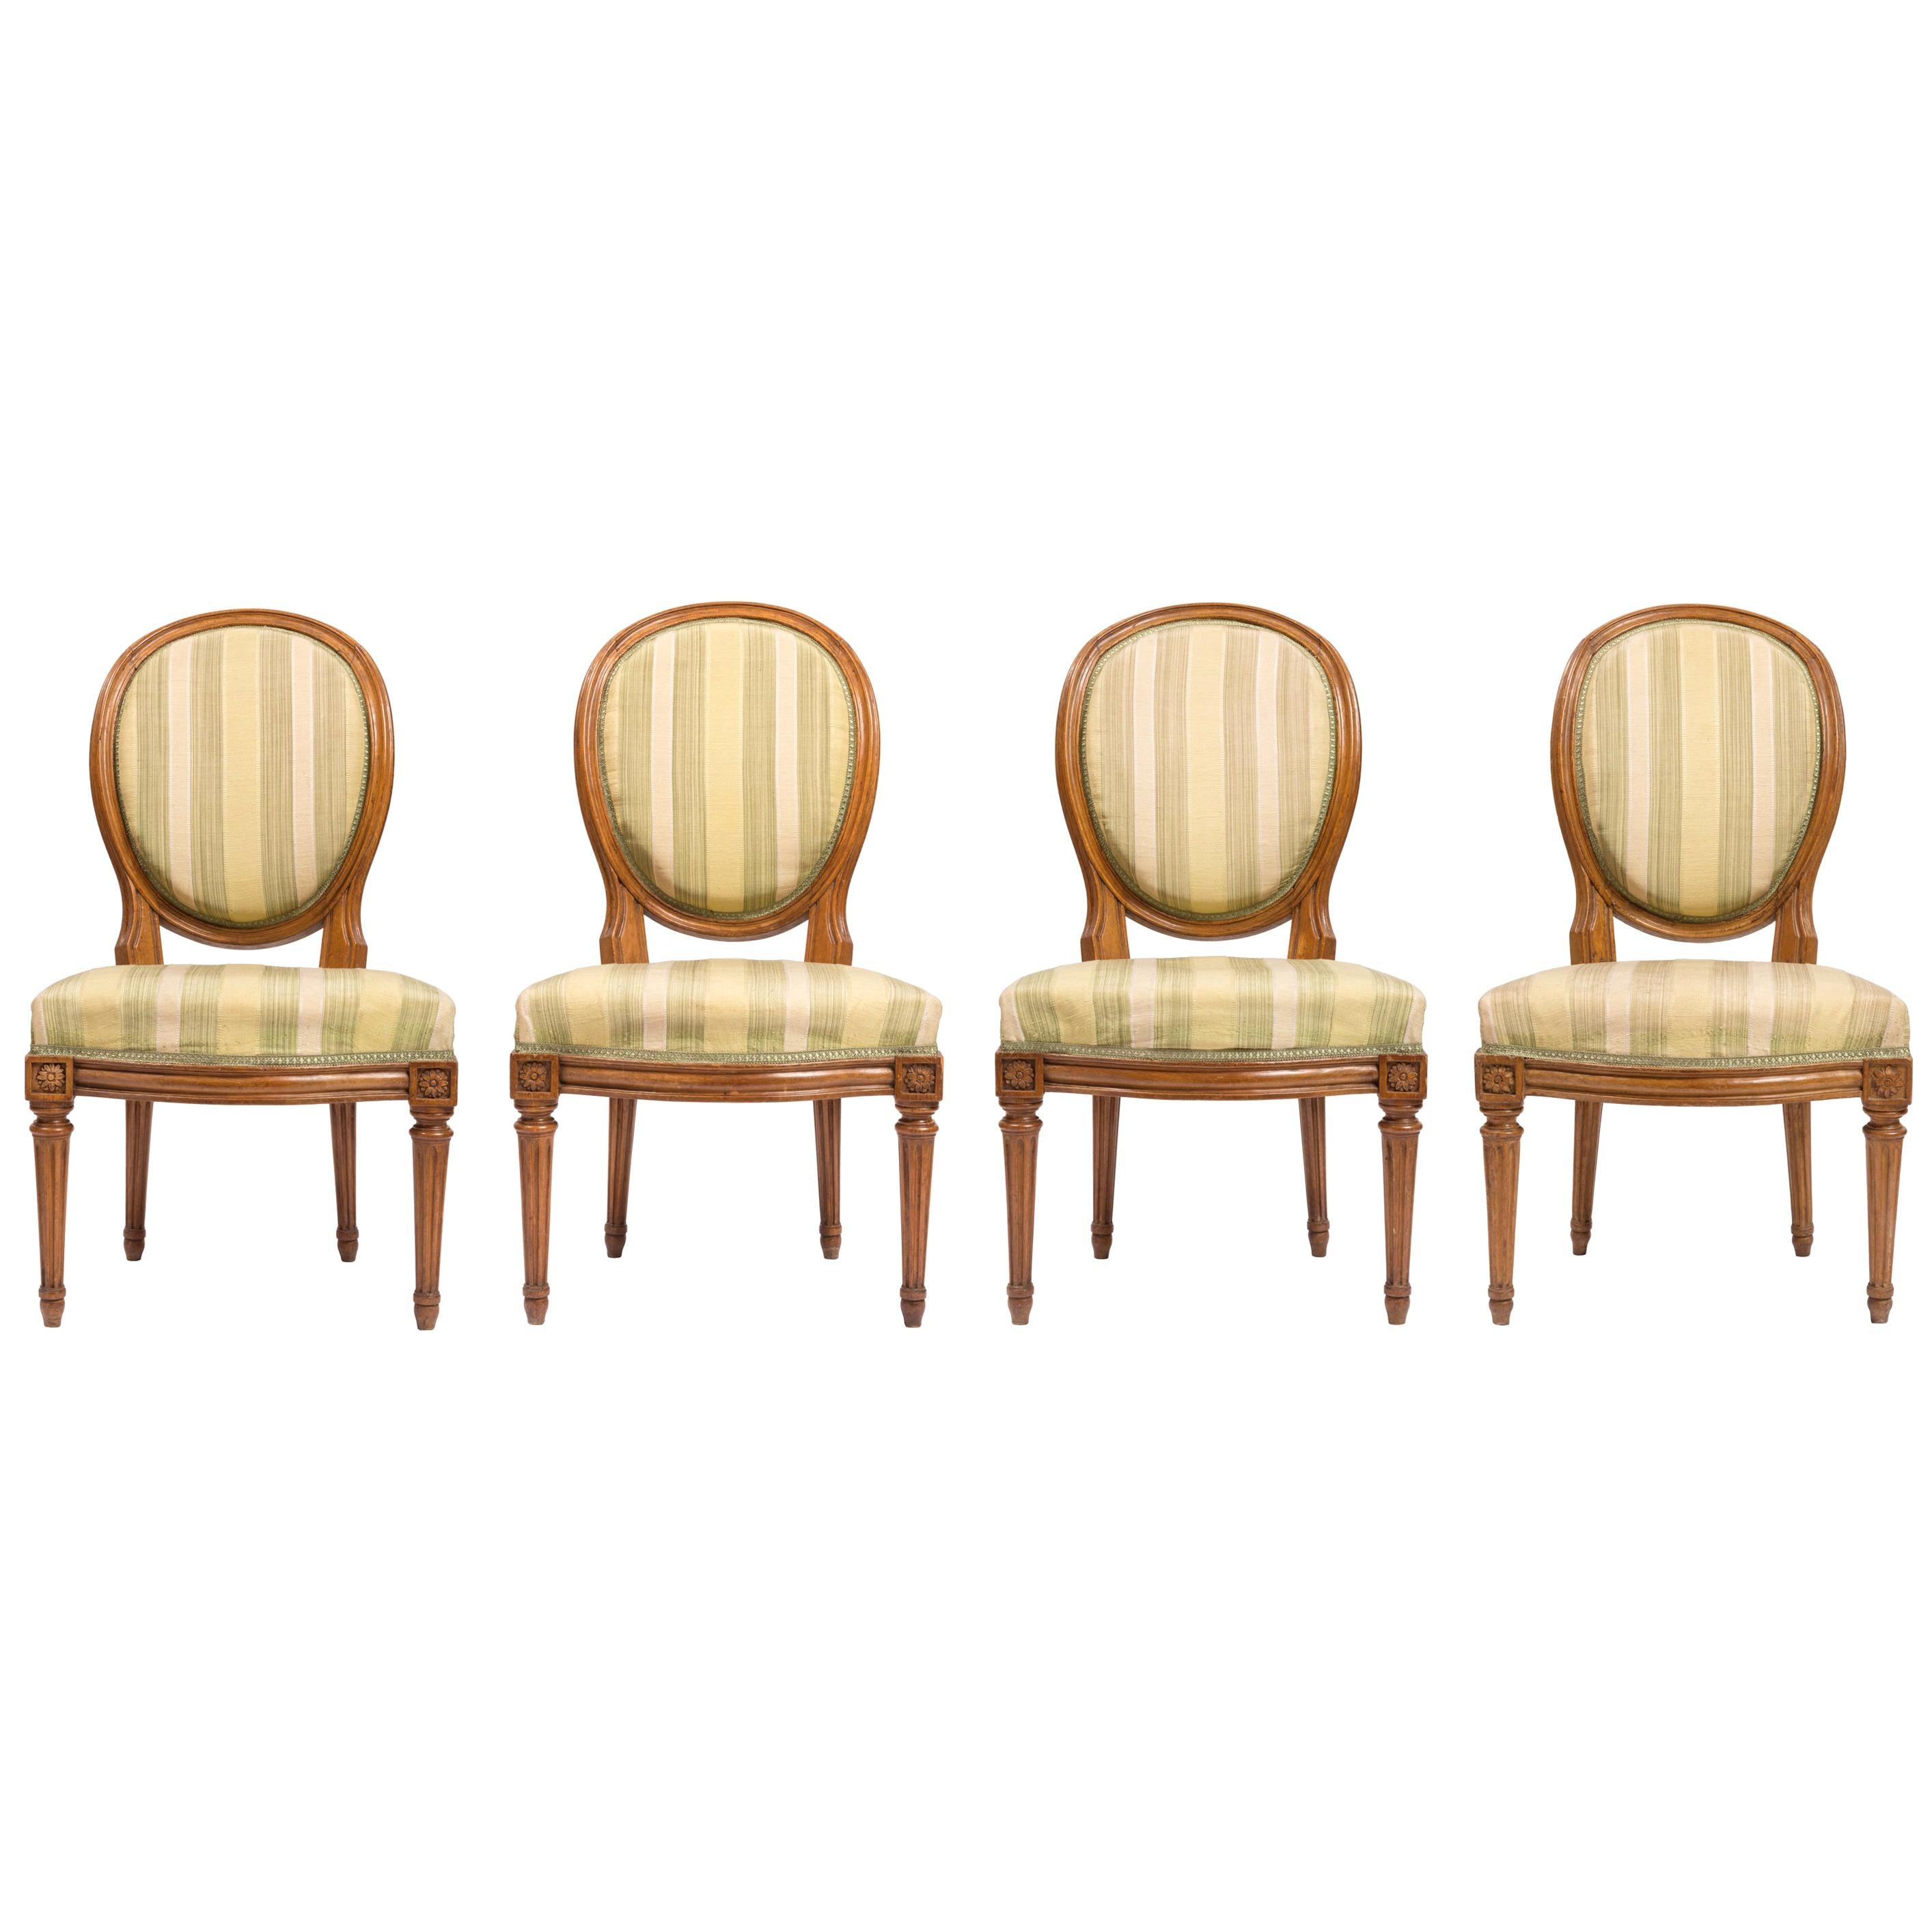 Set of Four Louis XVI Style Chairs with Striped Silk Upholstery, 19th Century